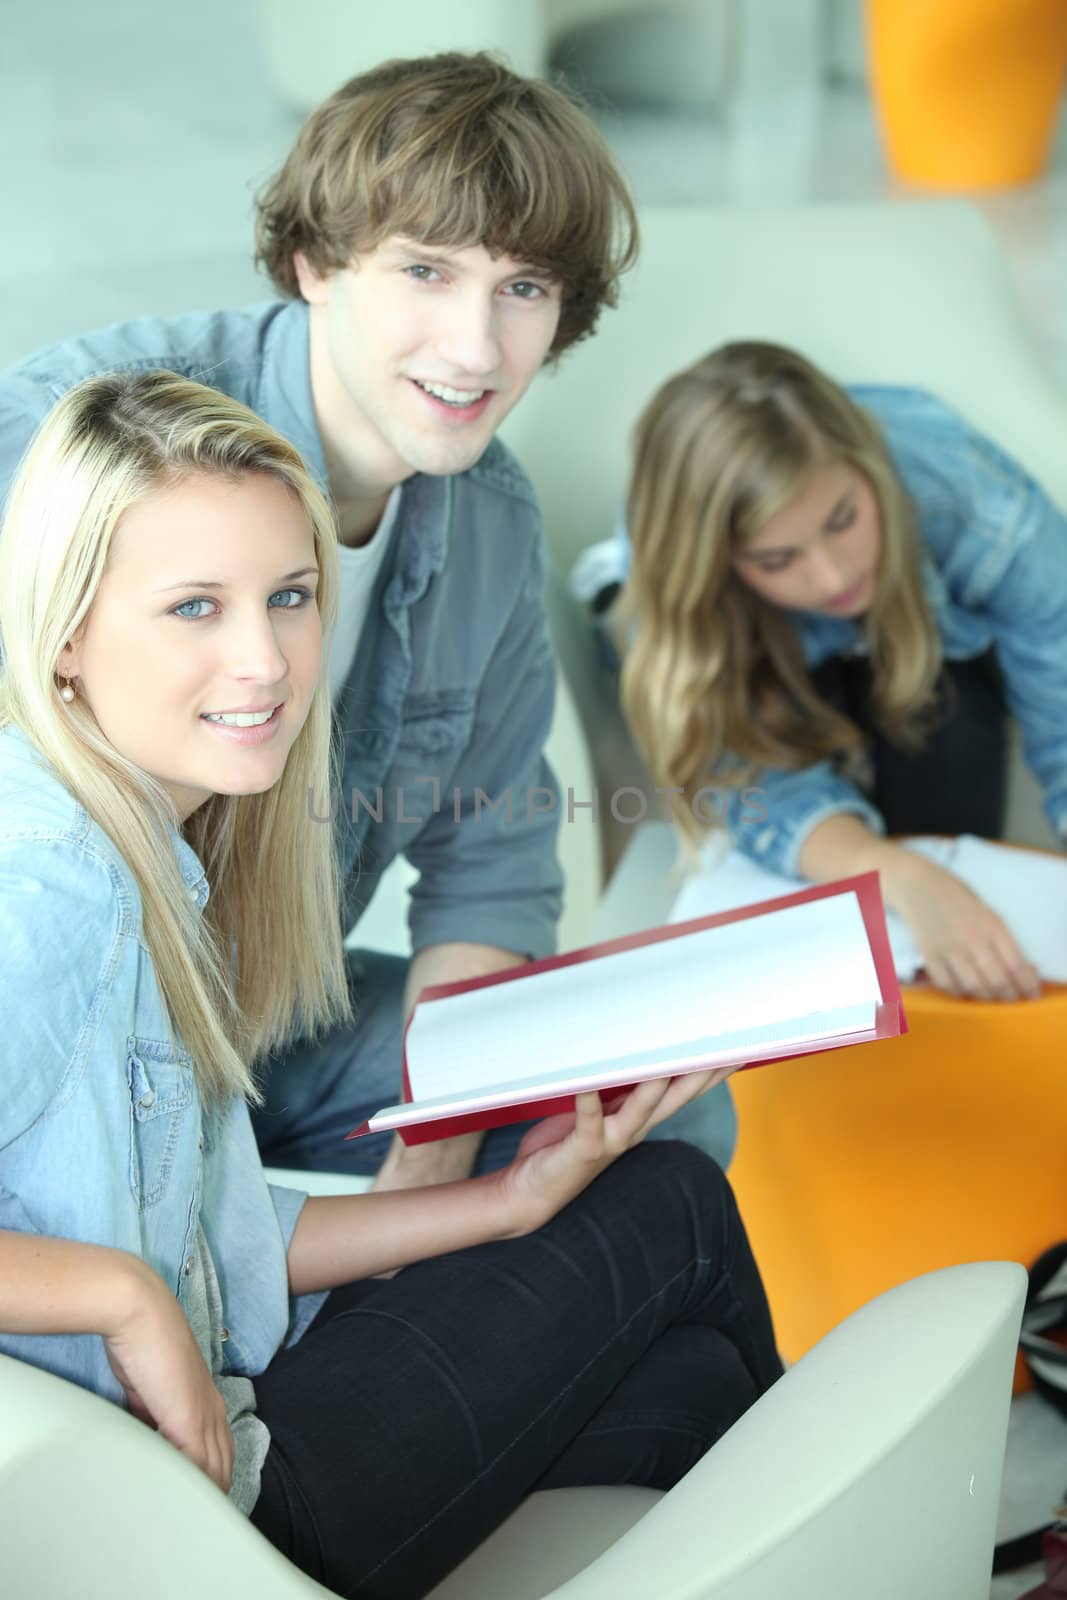 Students in a common room discussing an assignment by phovoir